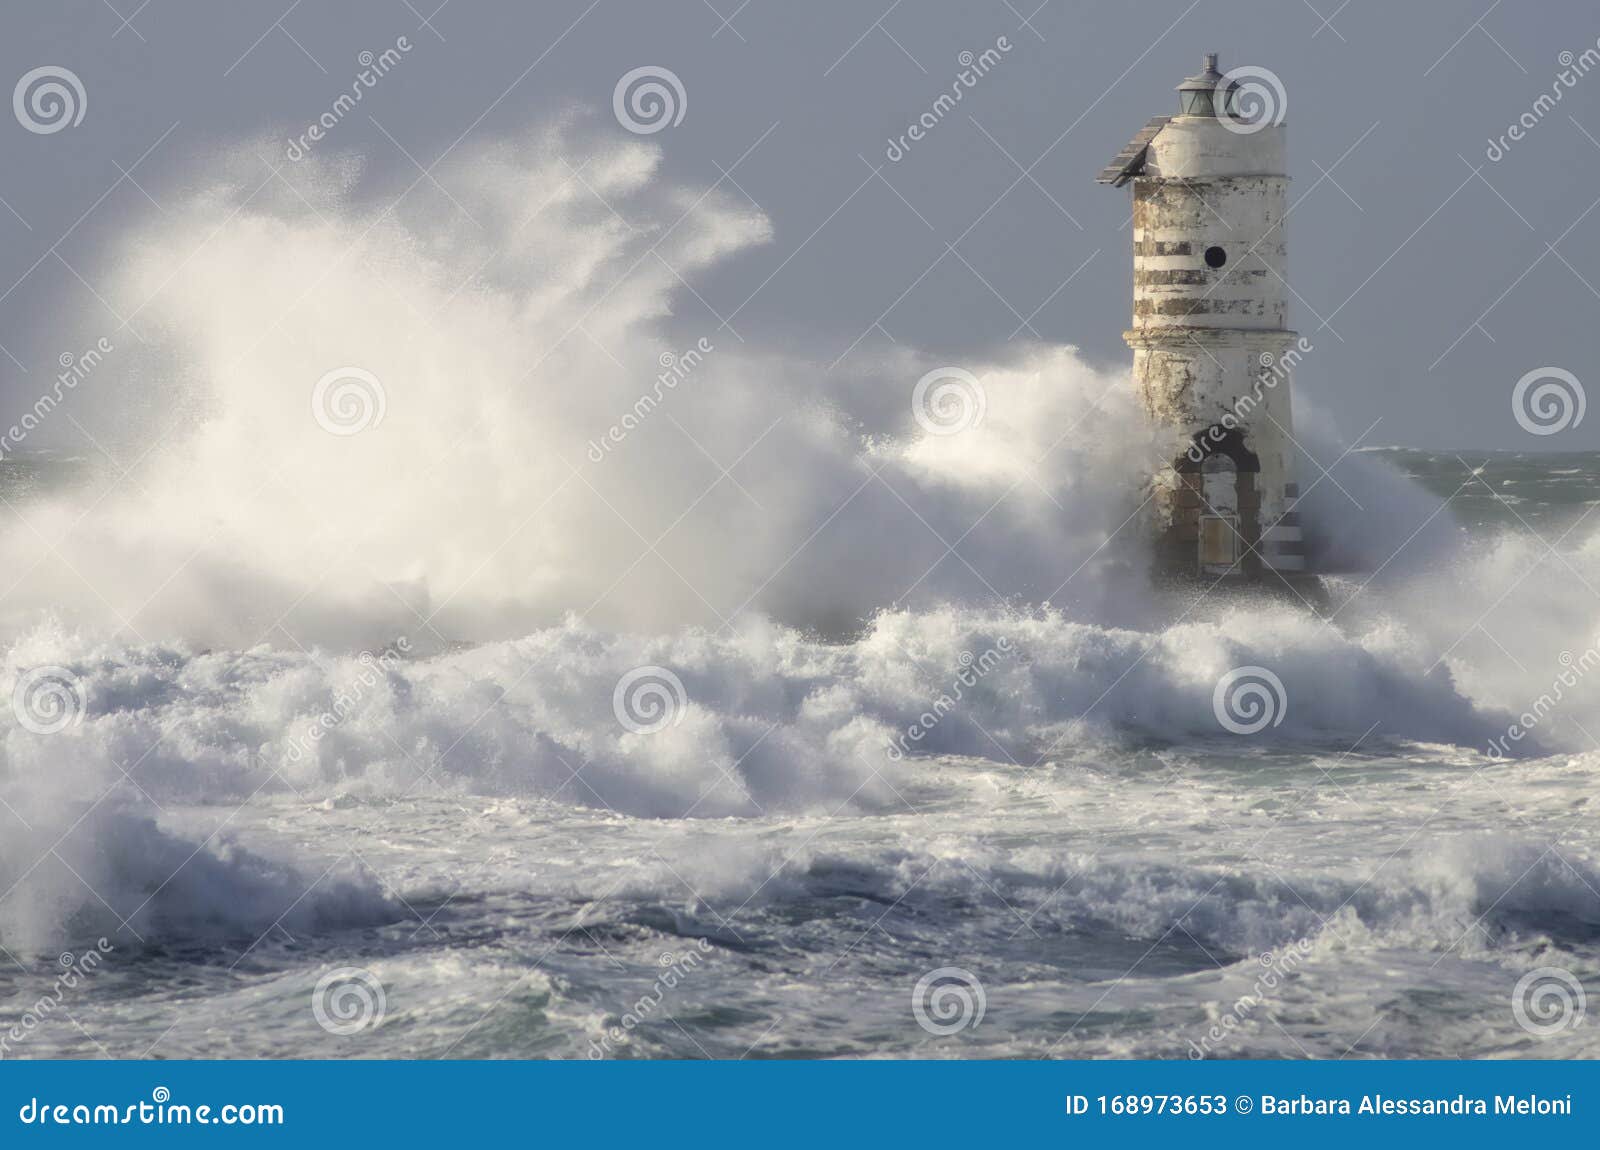 lighthouse shrouded in waves during a storm in the mediterranean.